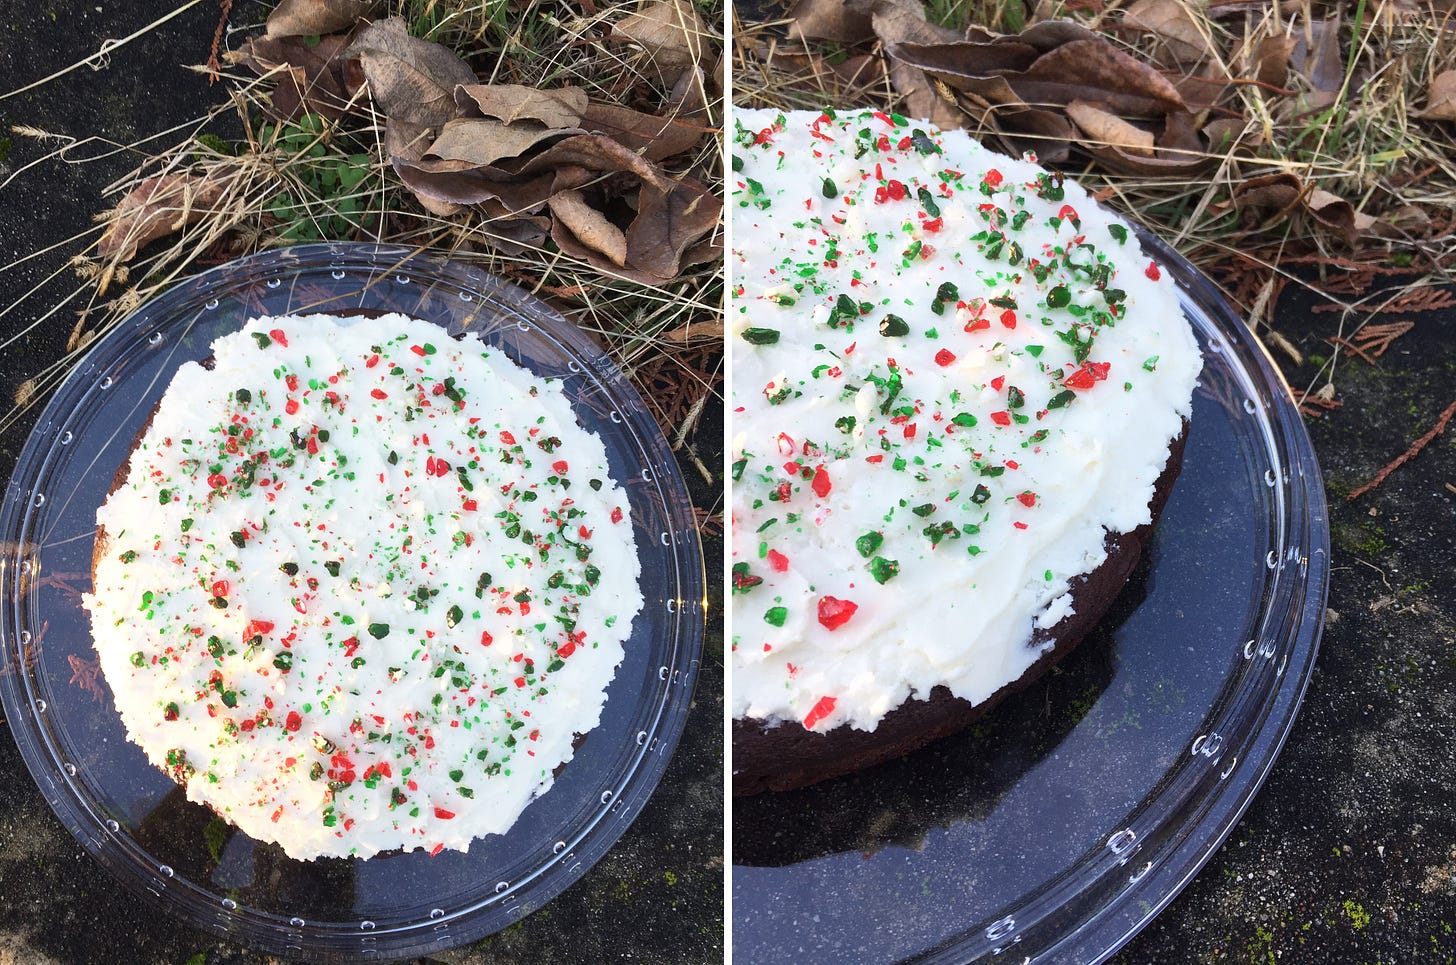 Left image: from above, on an outdoor ledge, a glass cake plate with a round chocolate cake covered in white icing and green, red, and white candy cane bits. Right image: a closer photo of the same cake, in the same location, from a slight angle.